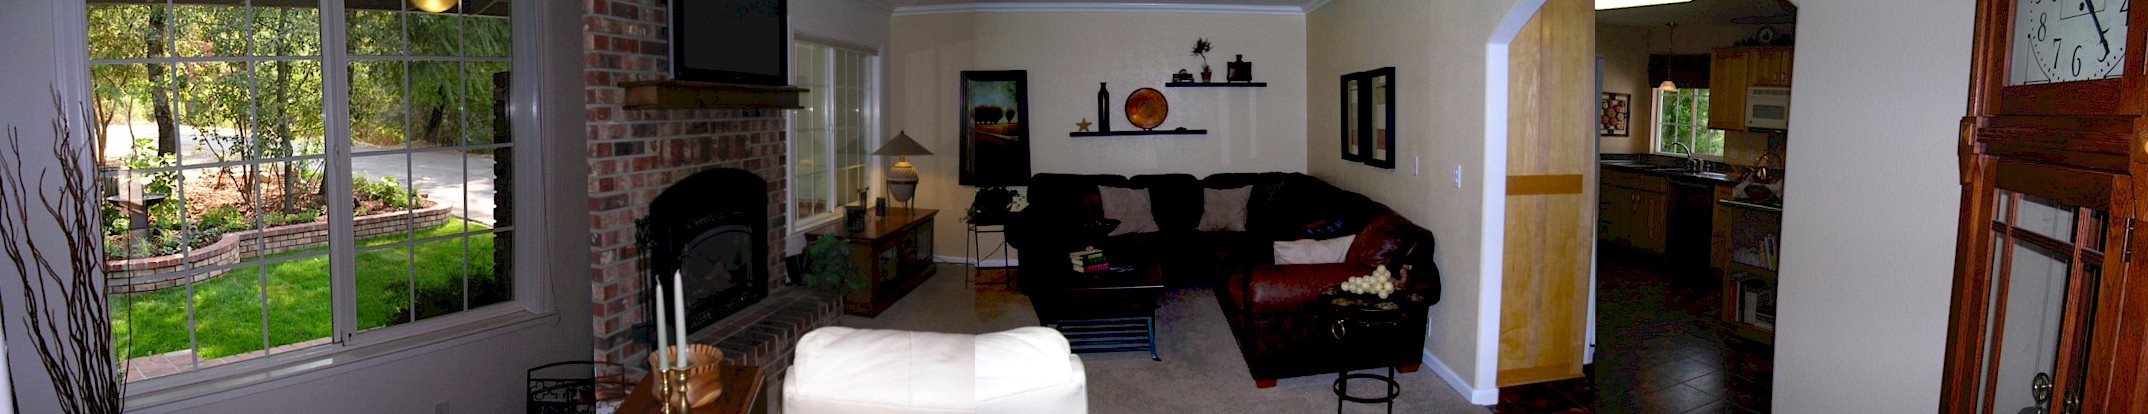 Panoramic of the Living room area.